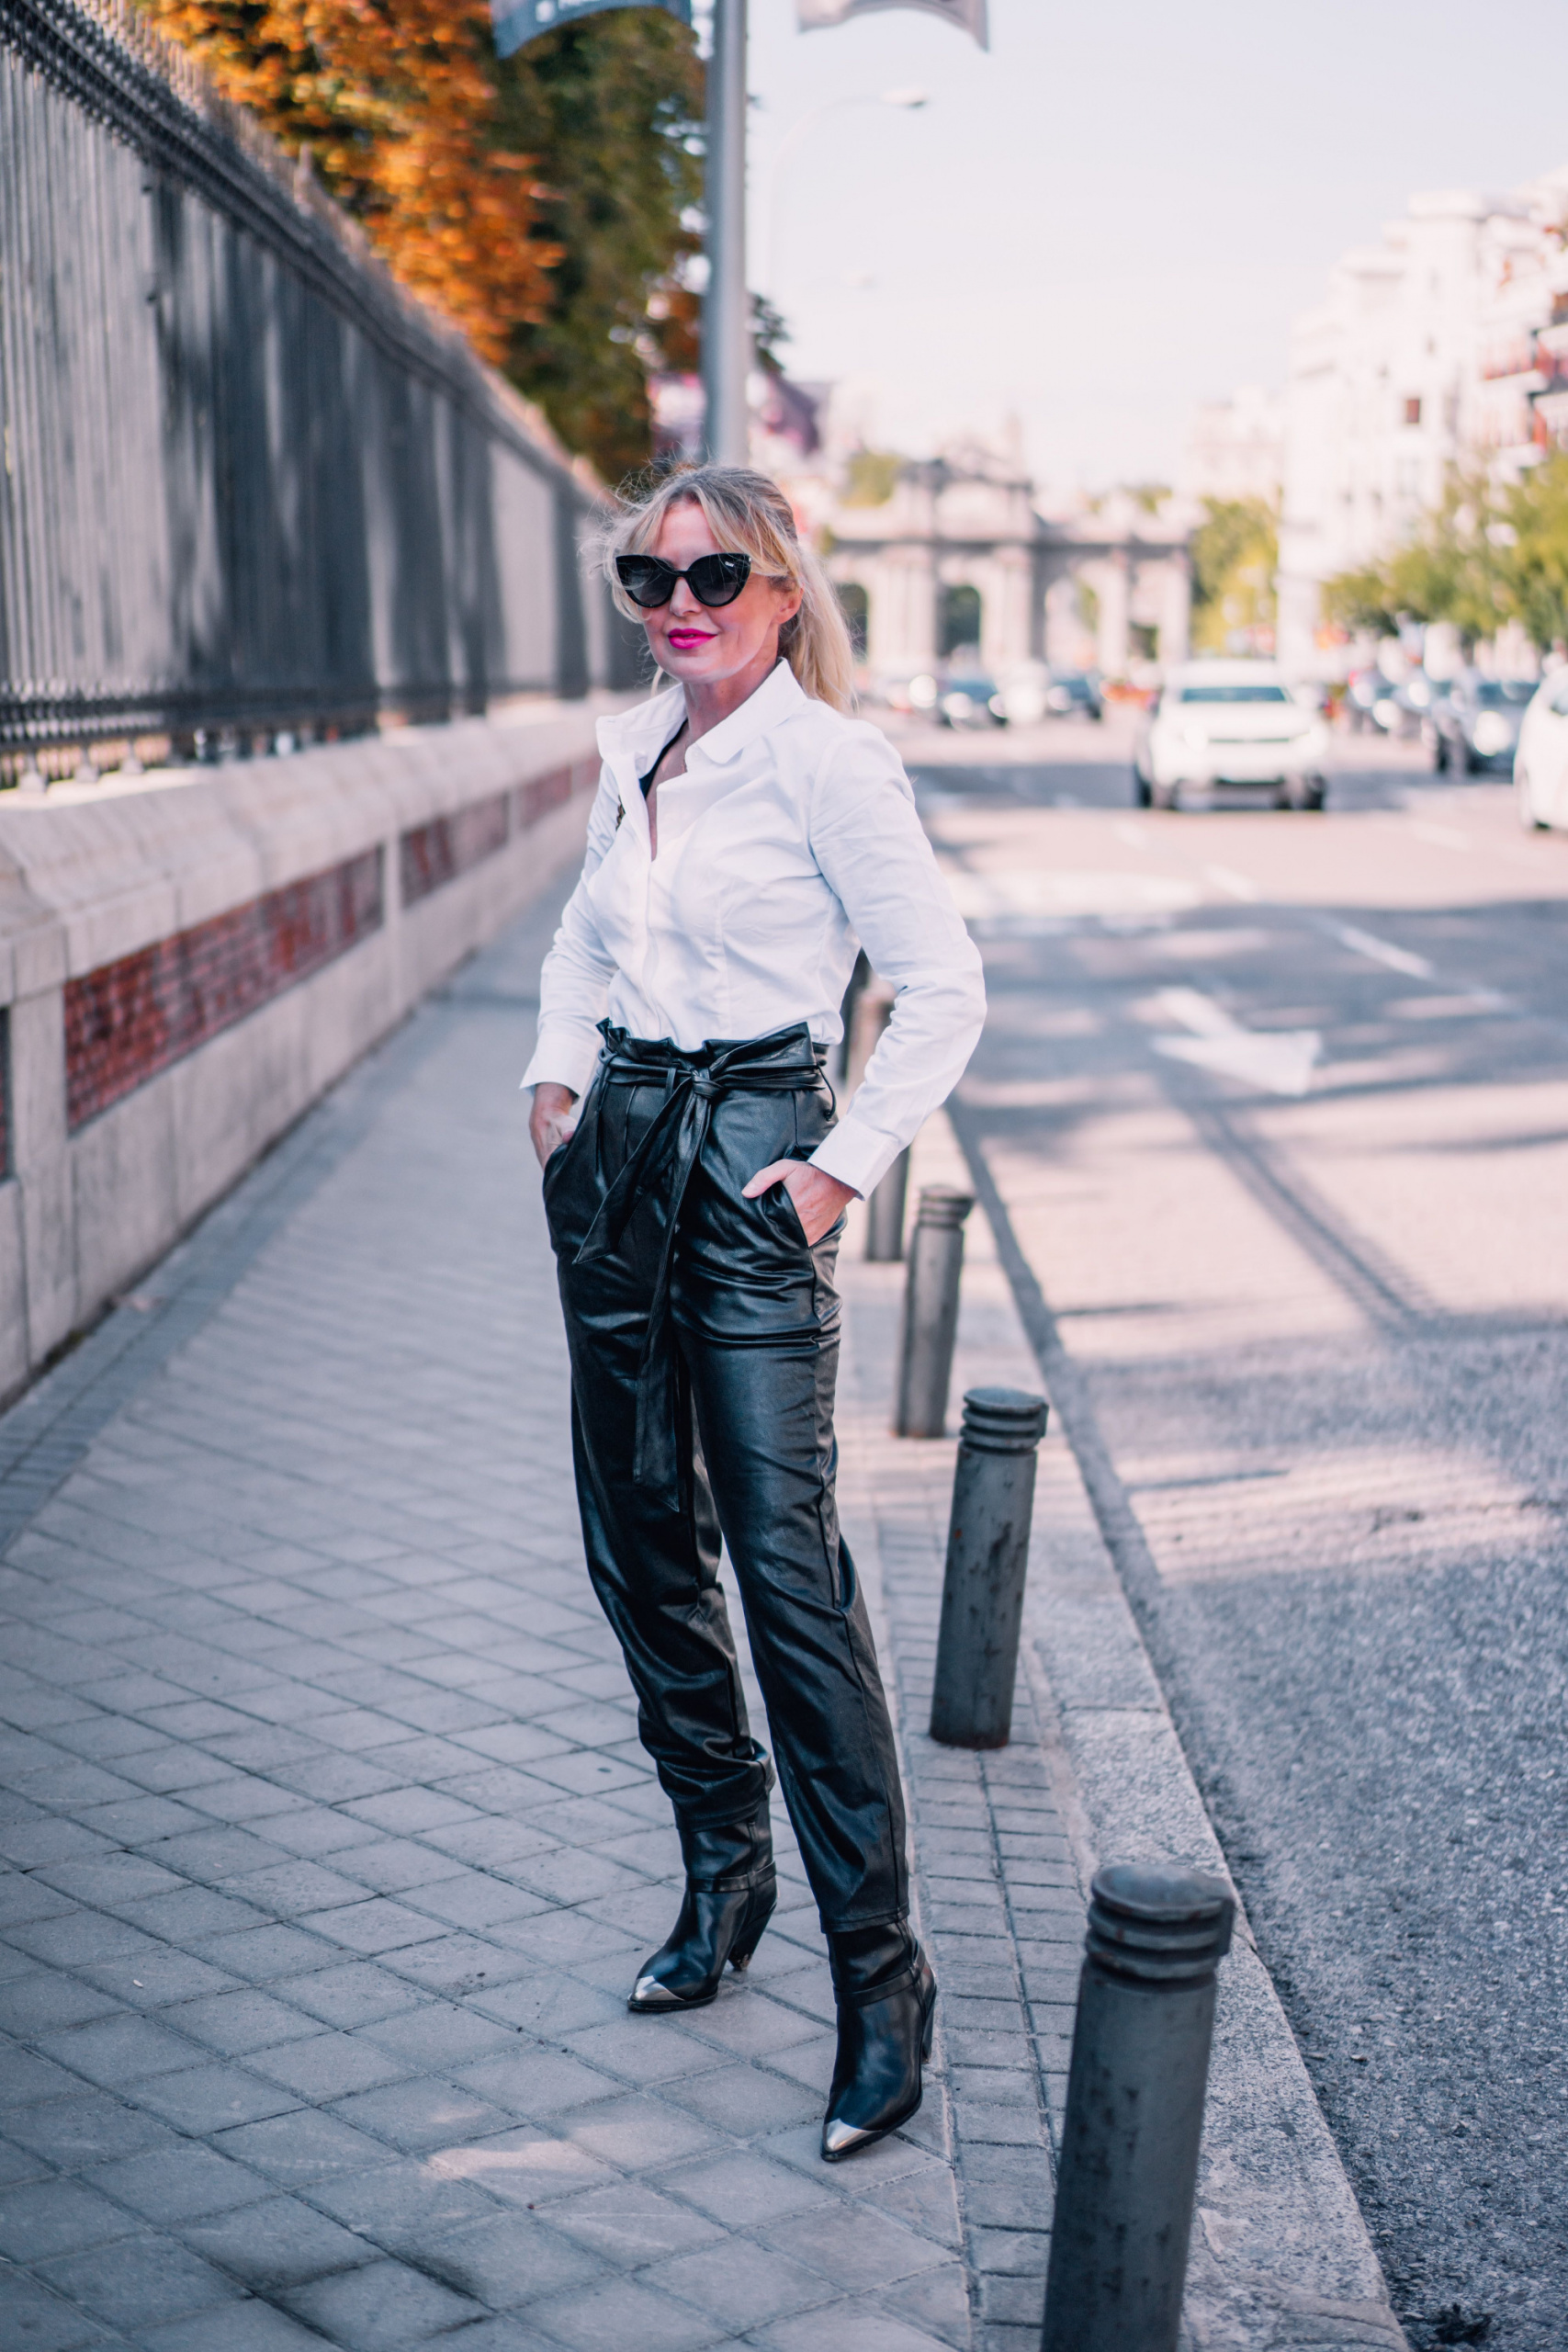 fashion trends, wearable fashion trends, spring fashion trends, fashion trends 2022, erin busbee fashion blogger over 40, leather trends, classic white button-down shirt, madrid, spain